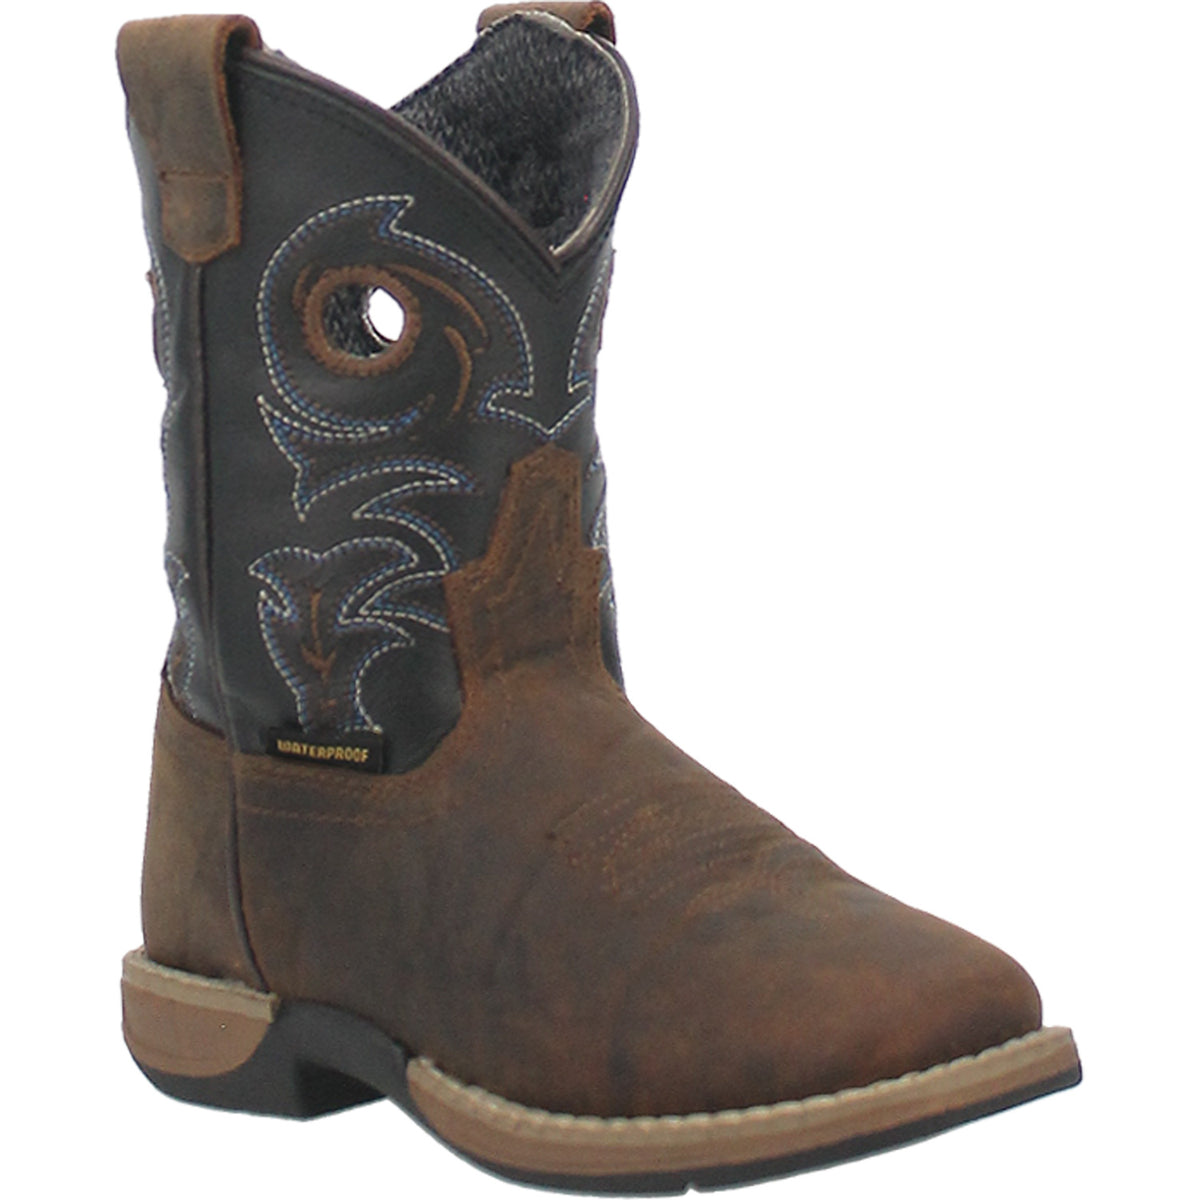 STORMS EYE JR LEATHER CHILDREN'S BOOT Cover